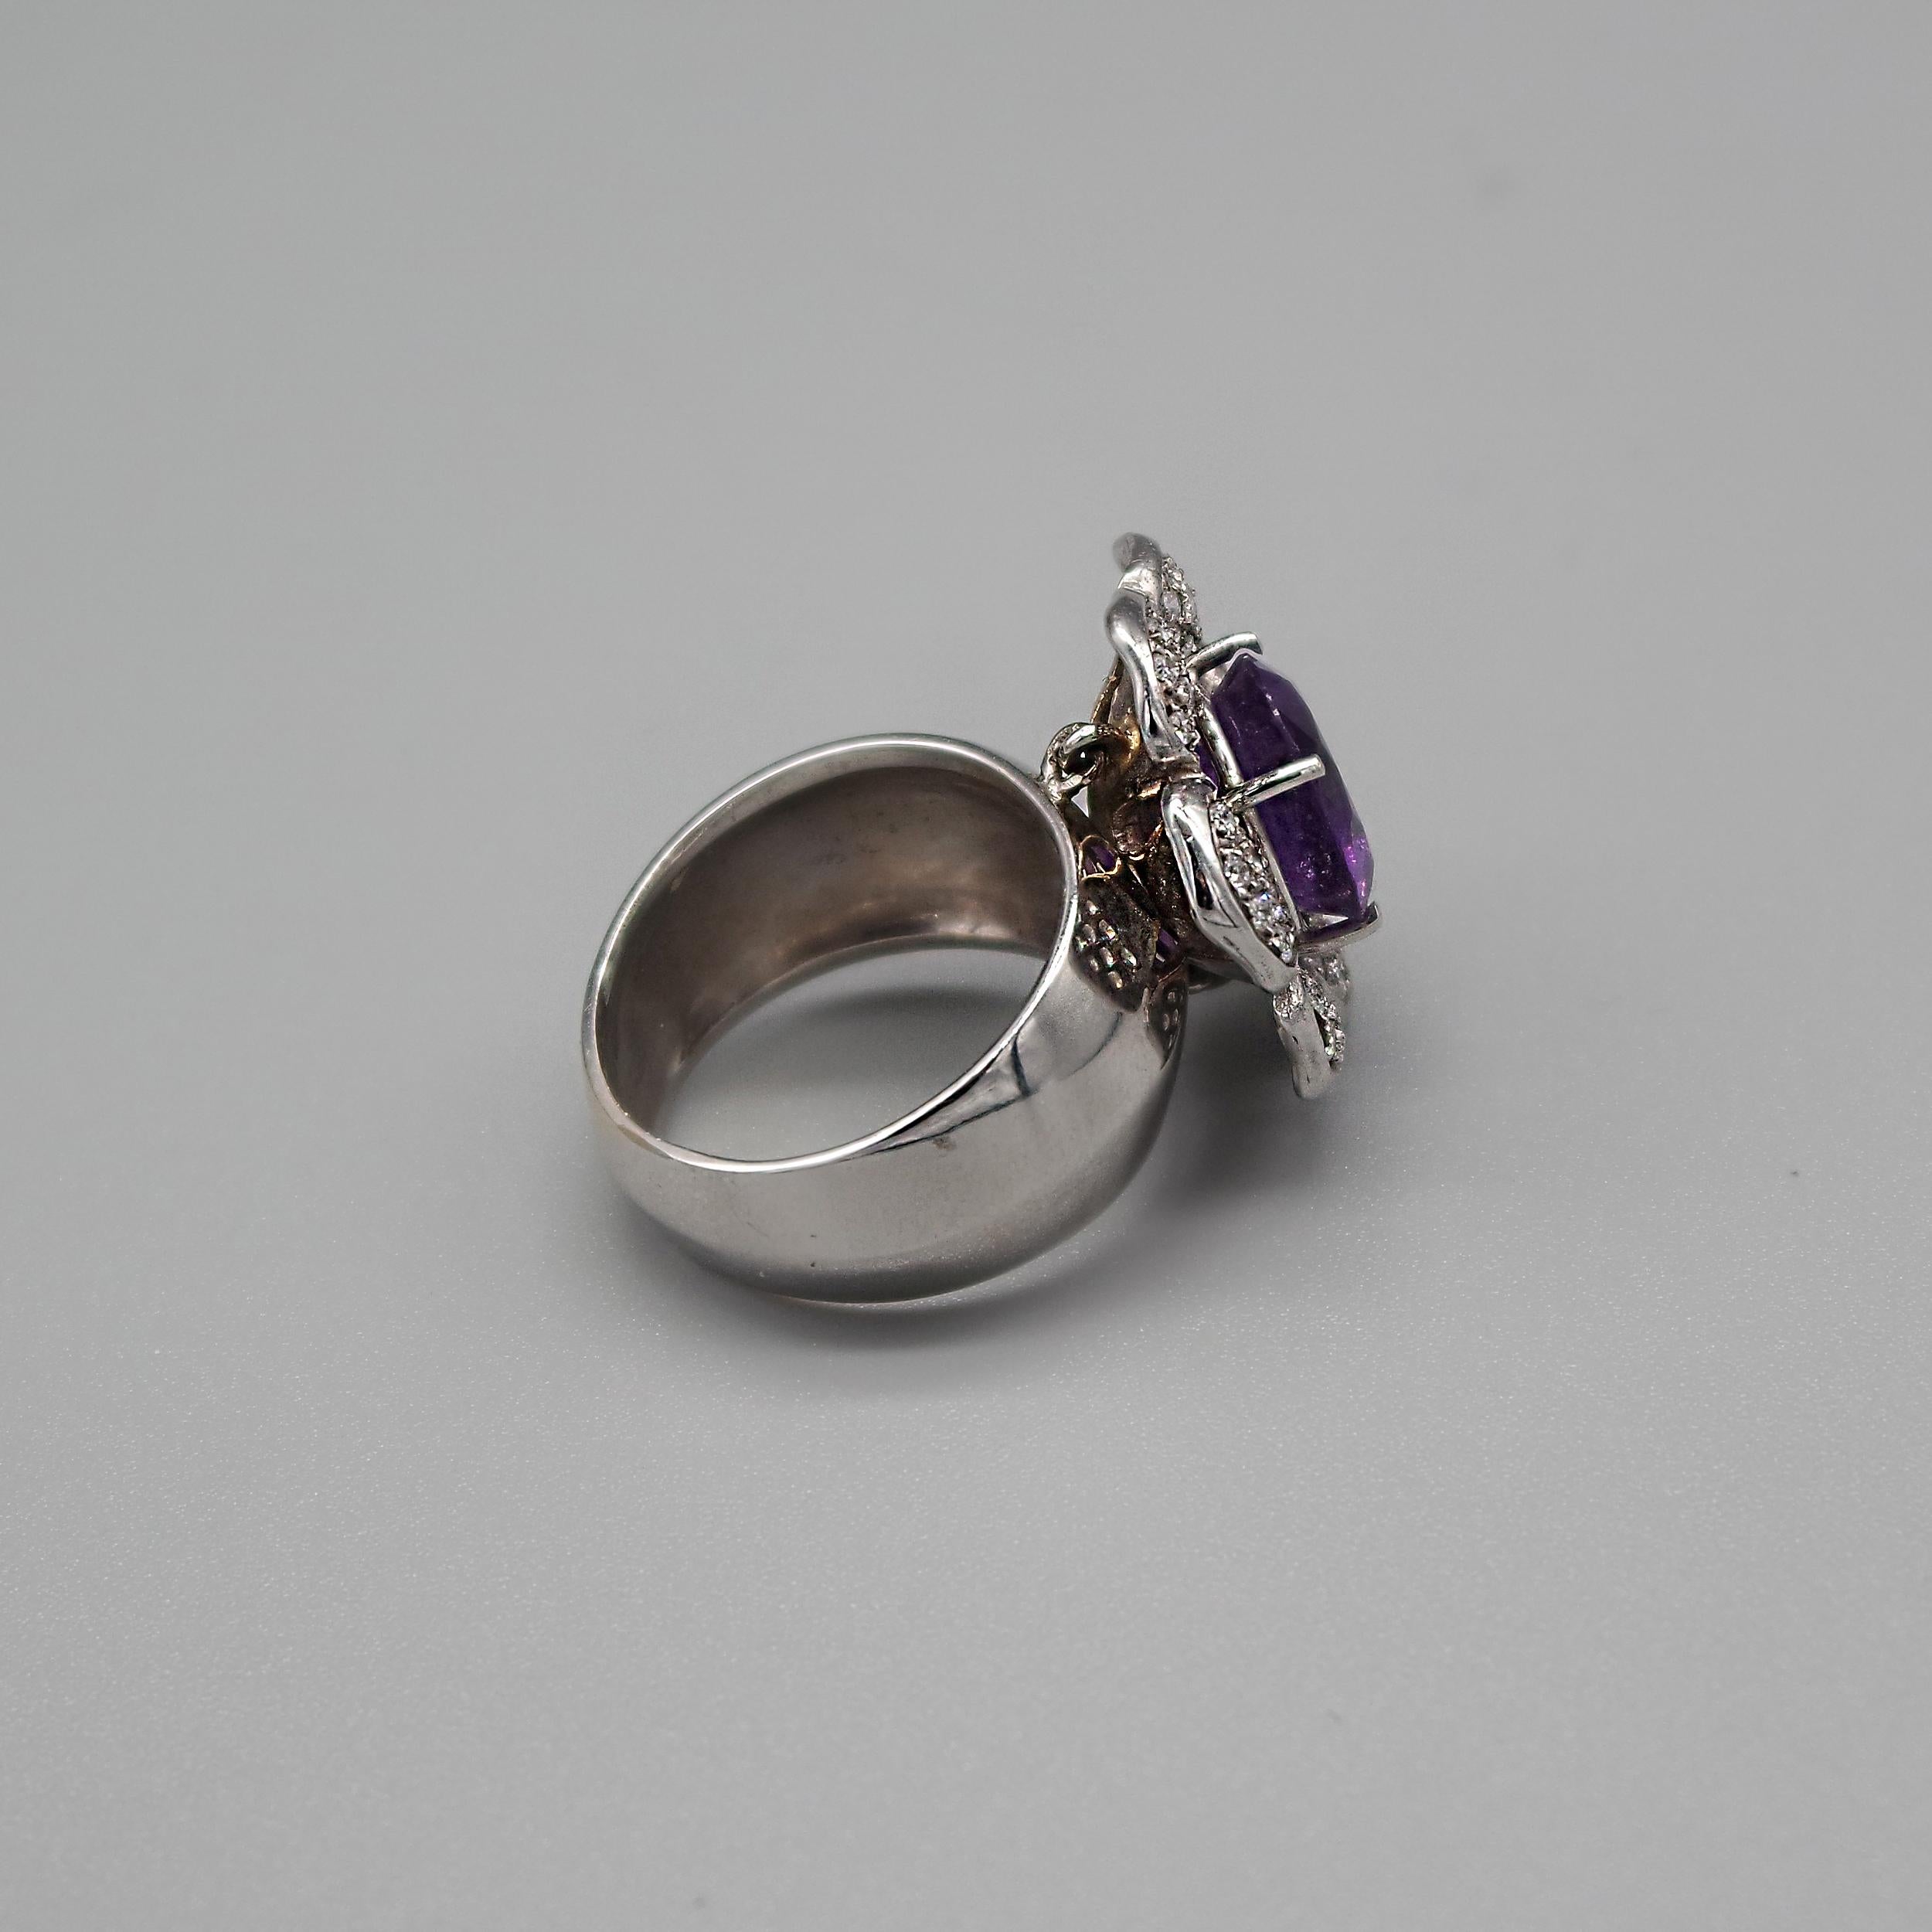 Oval Cut 4.35 Carats Amethyst and Diamonds on an 18 Karat White Gold Cocktail Ring